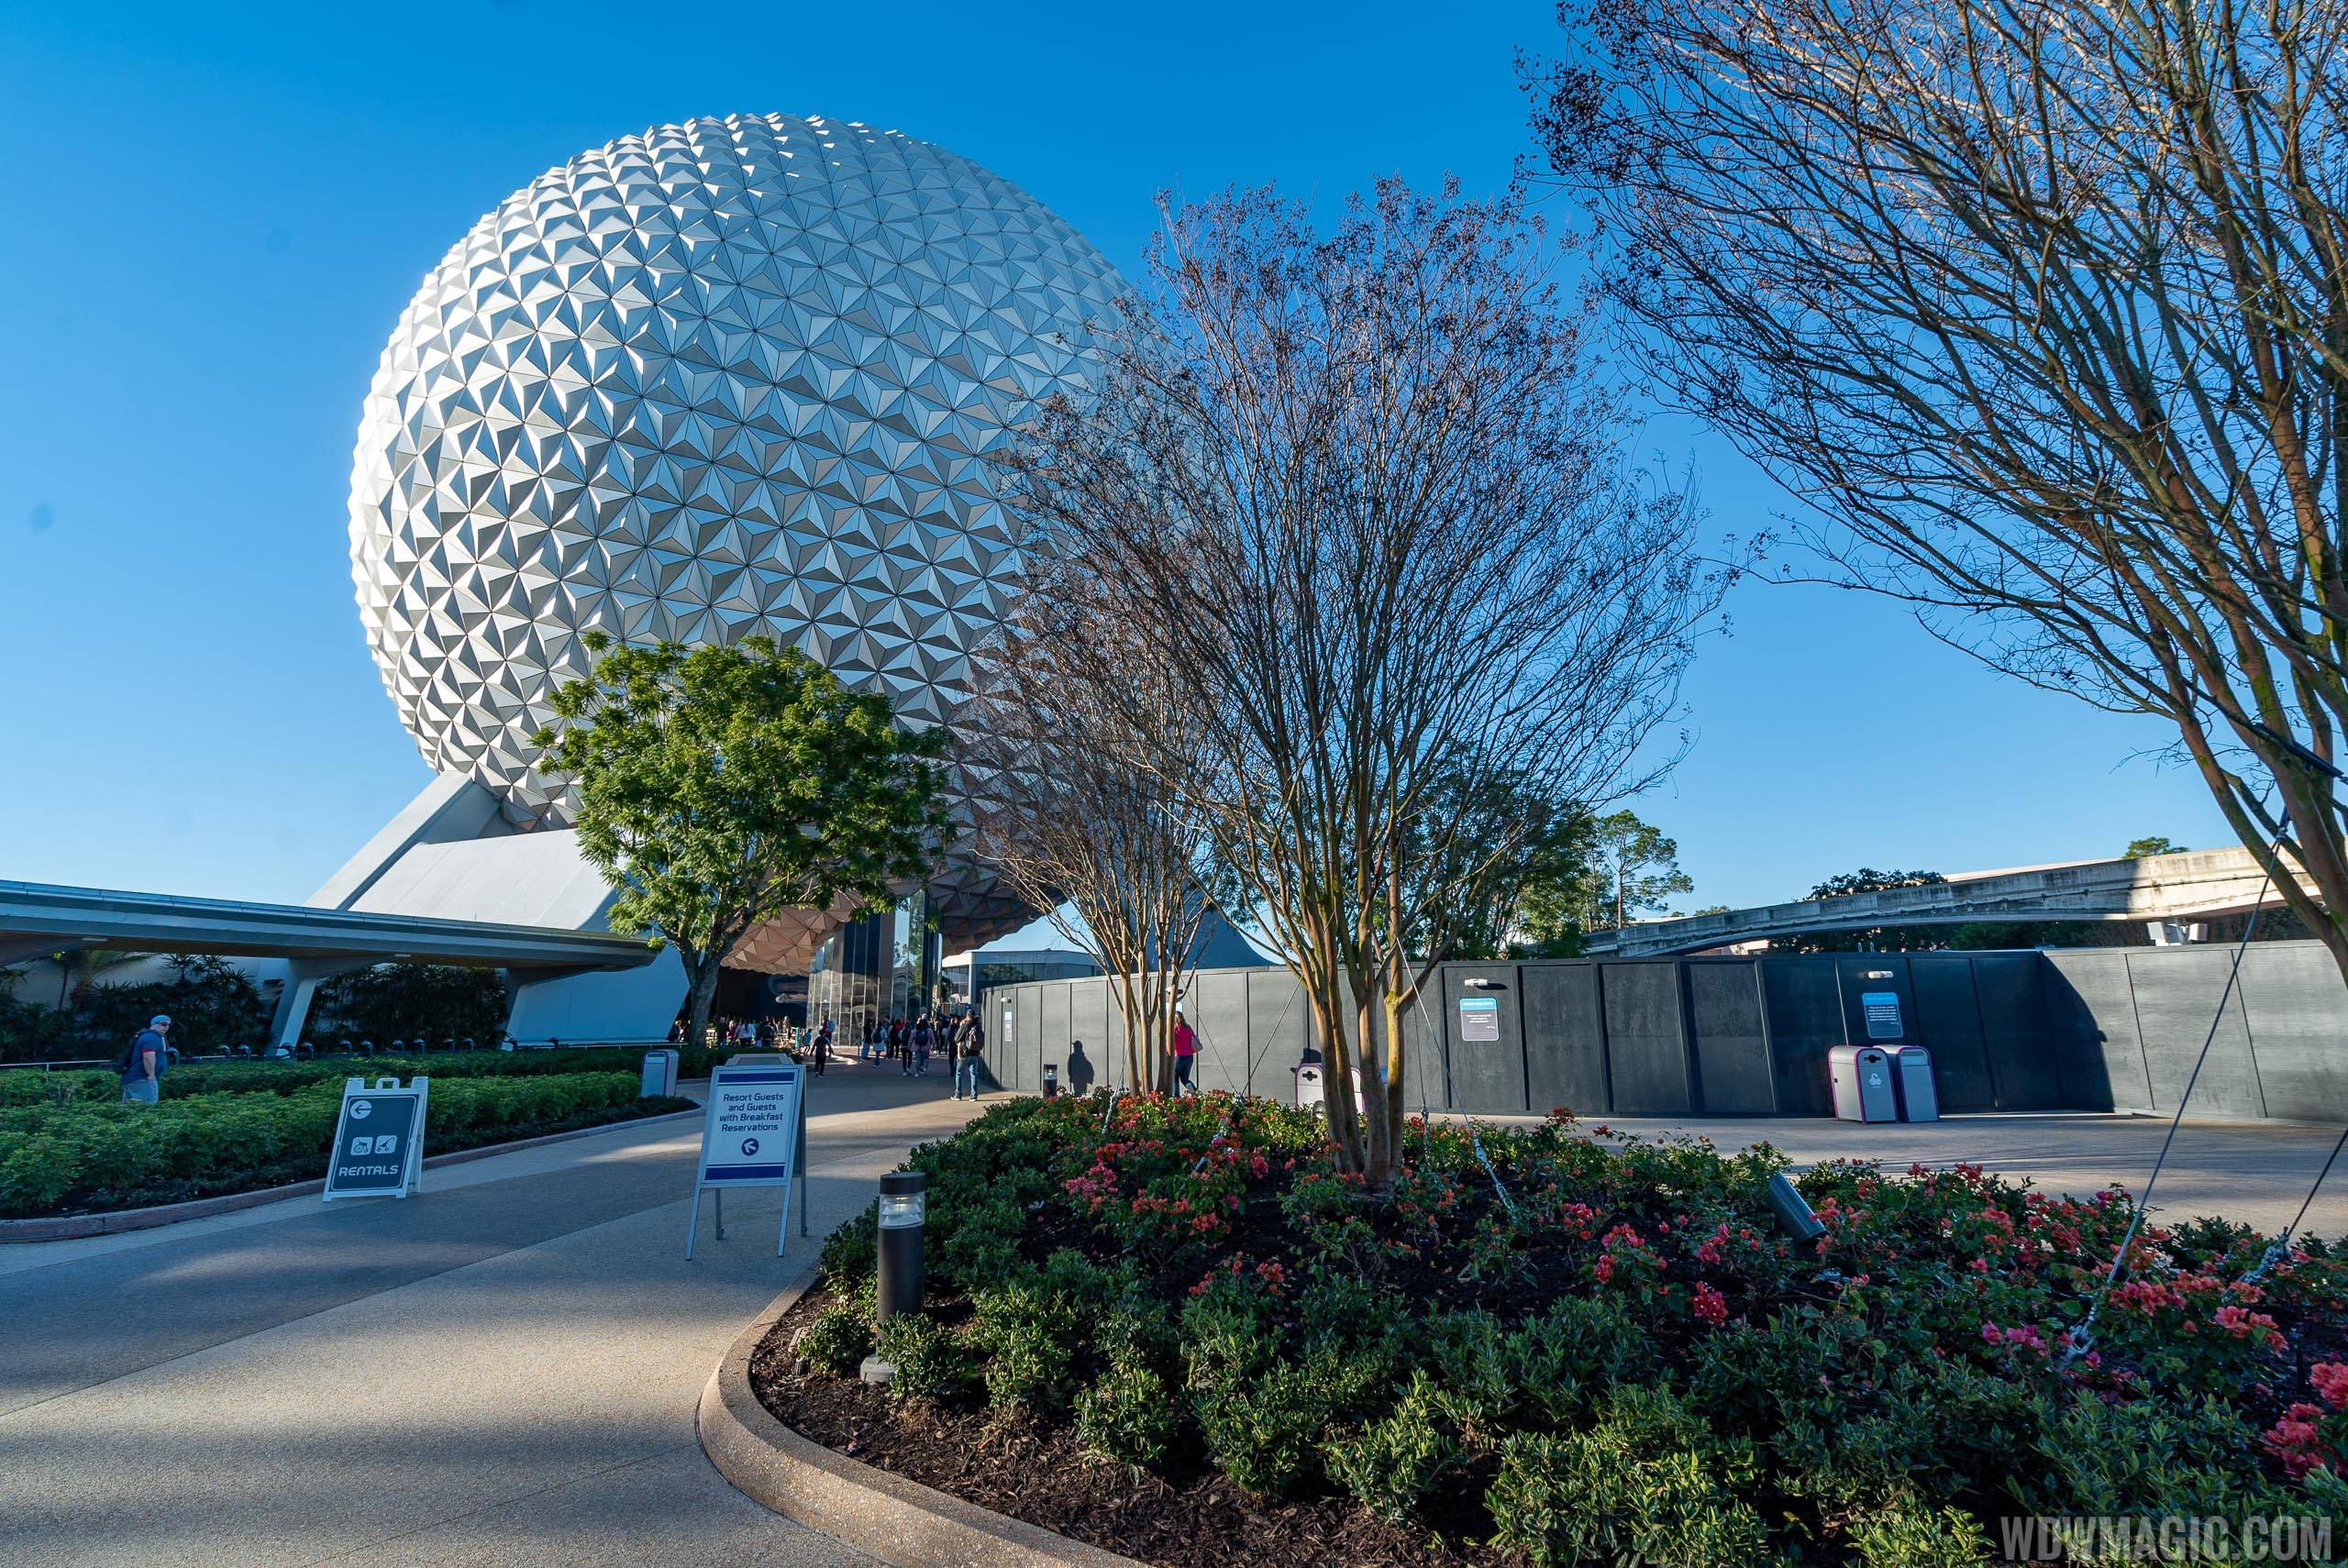 Epcot central area construction - January 2020